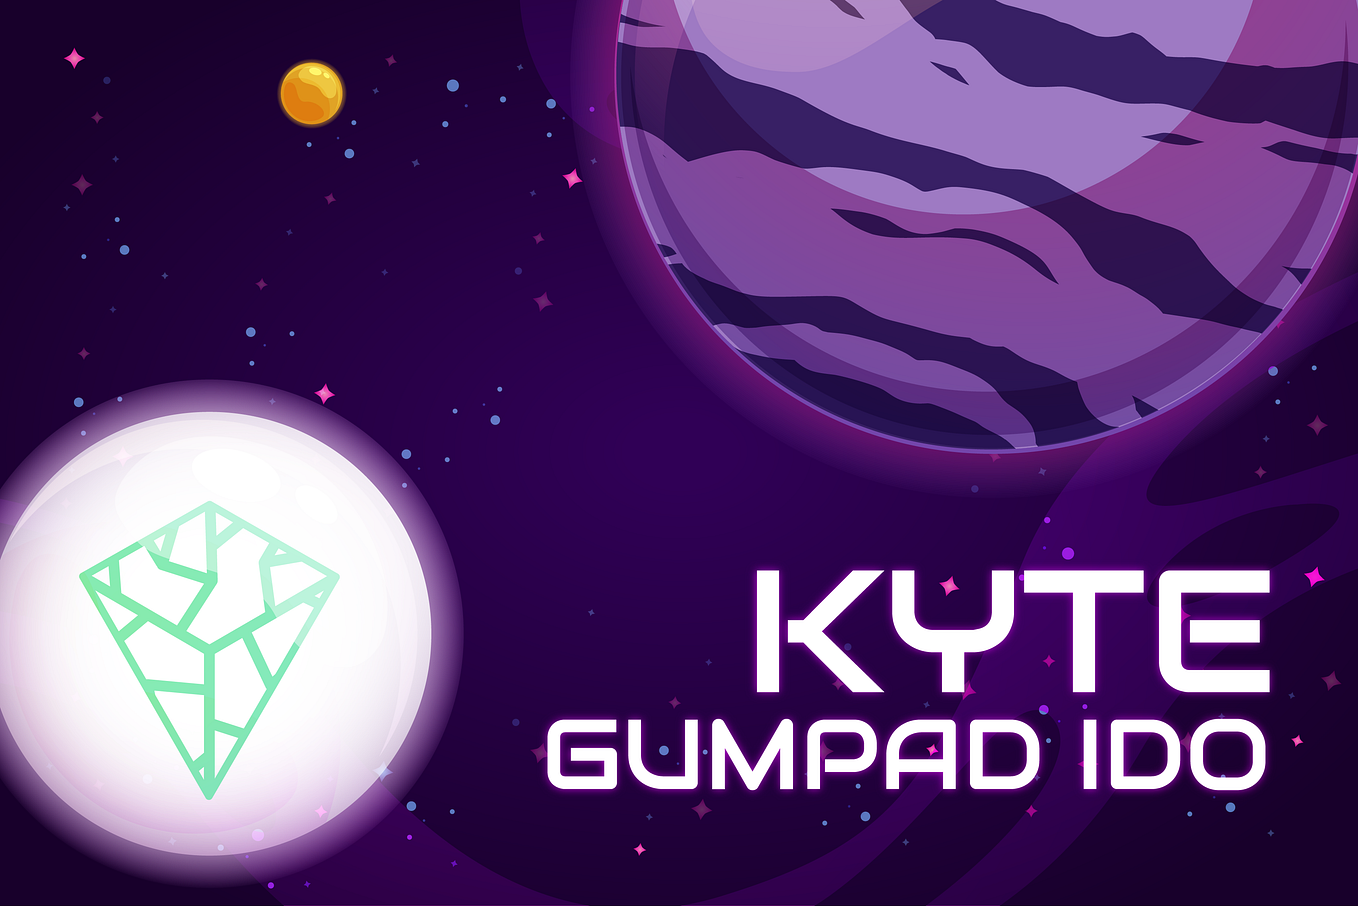 The next projects launchpad: KYTE